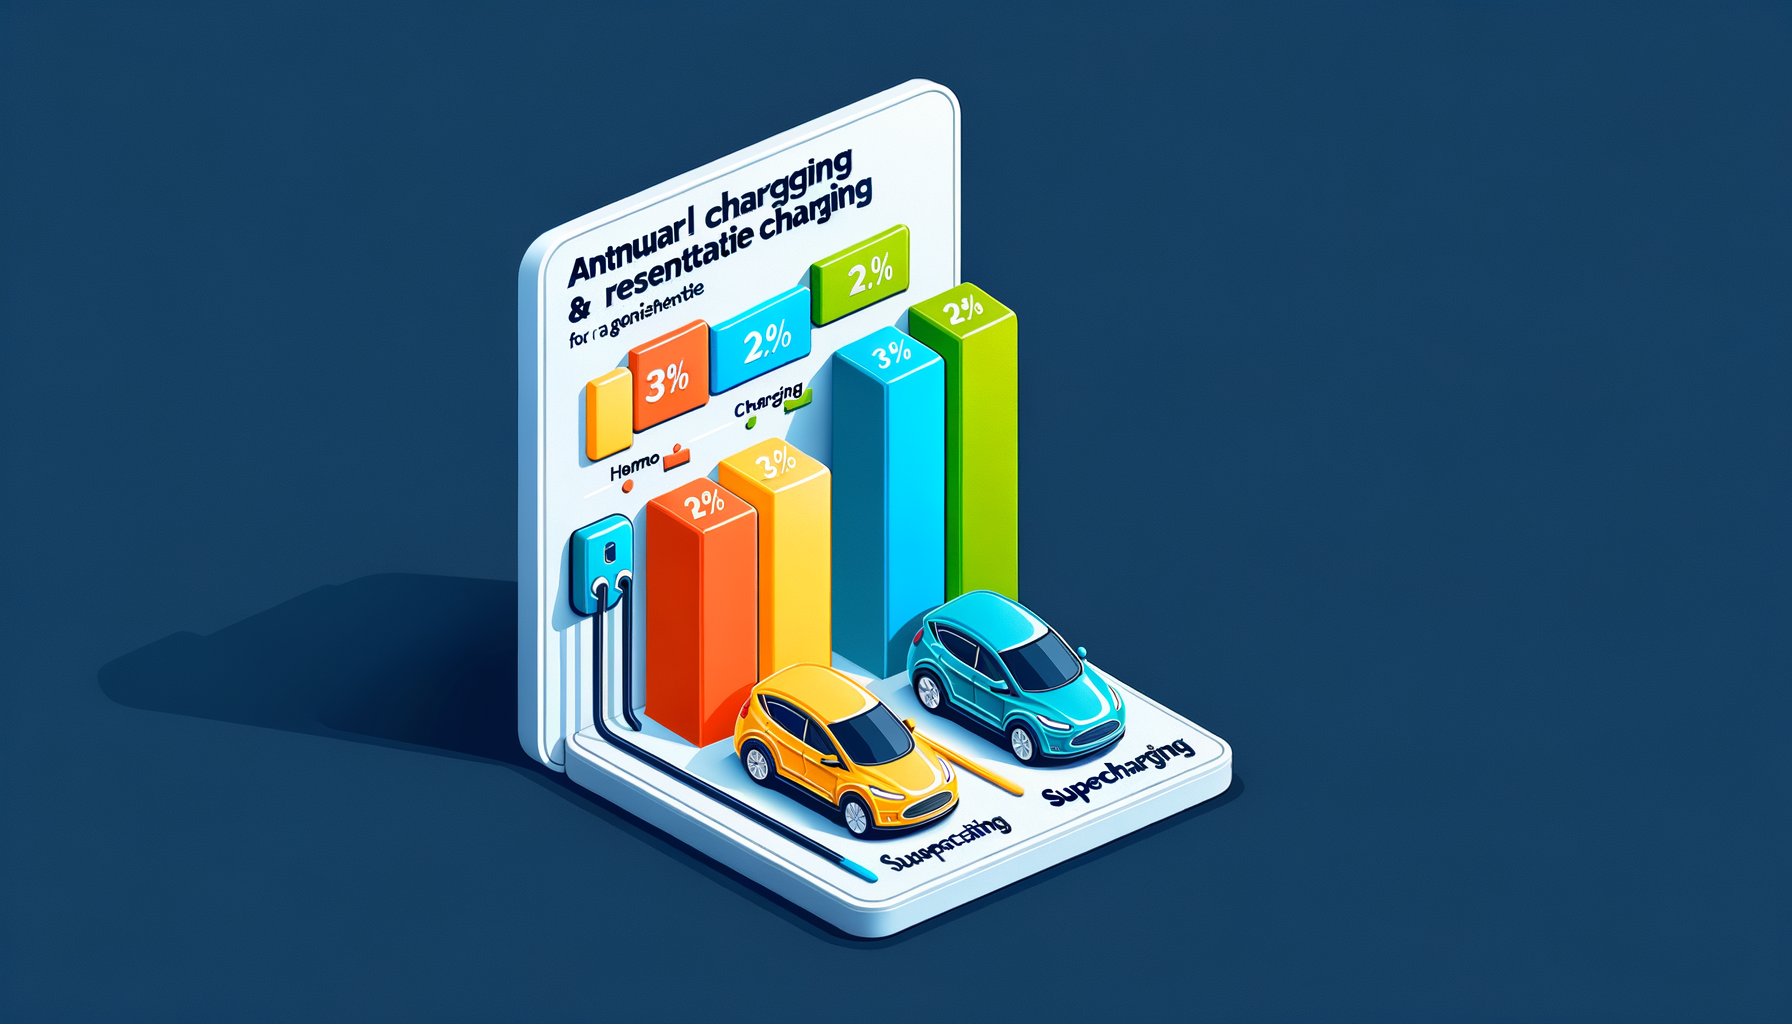 ALT: Annual charging costs graph for a Tesla Model Y comparing home and Supercharger expenses